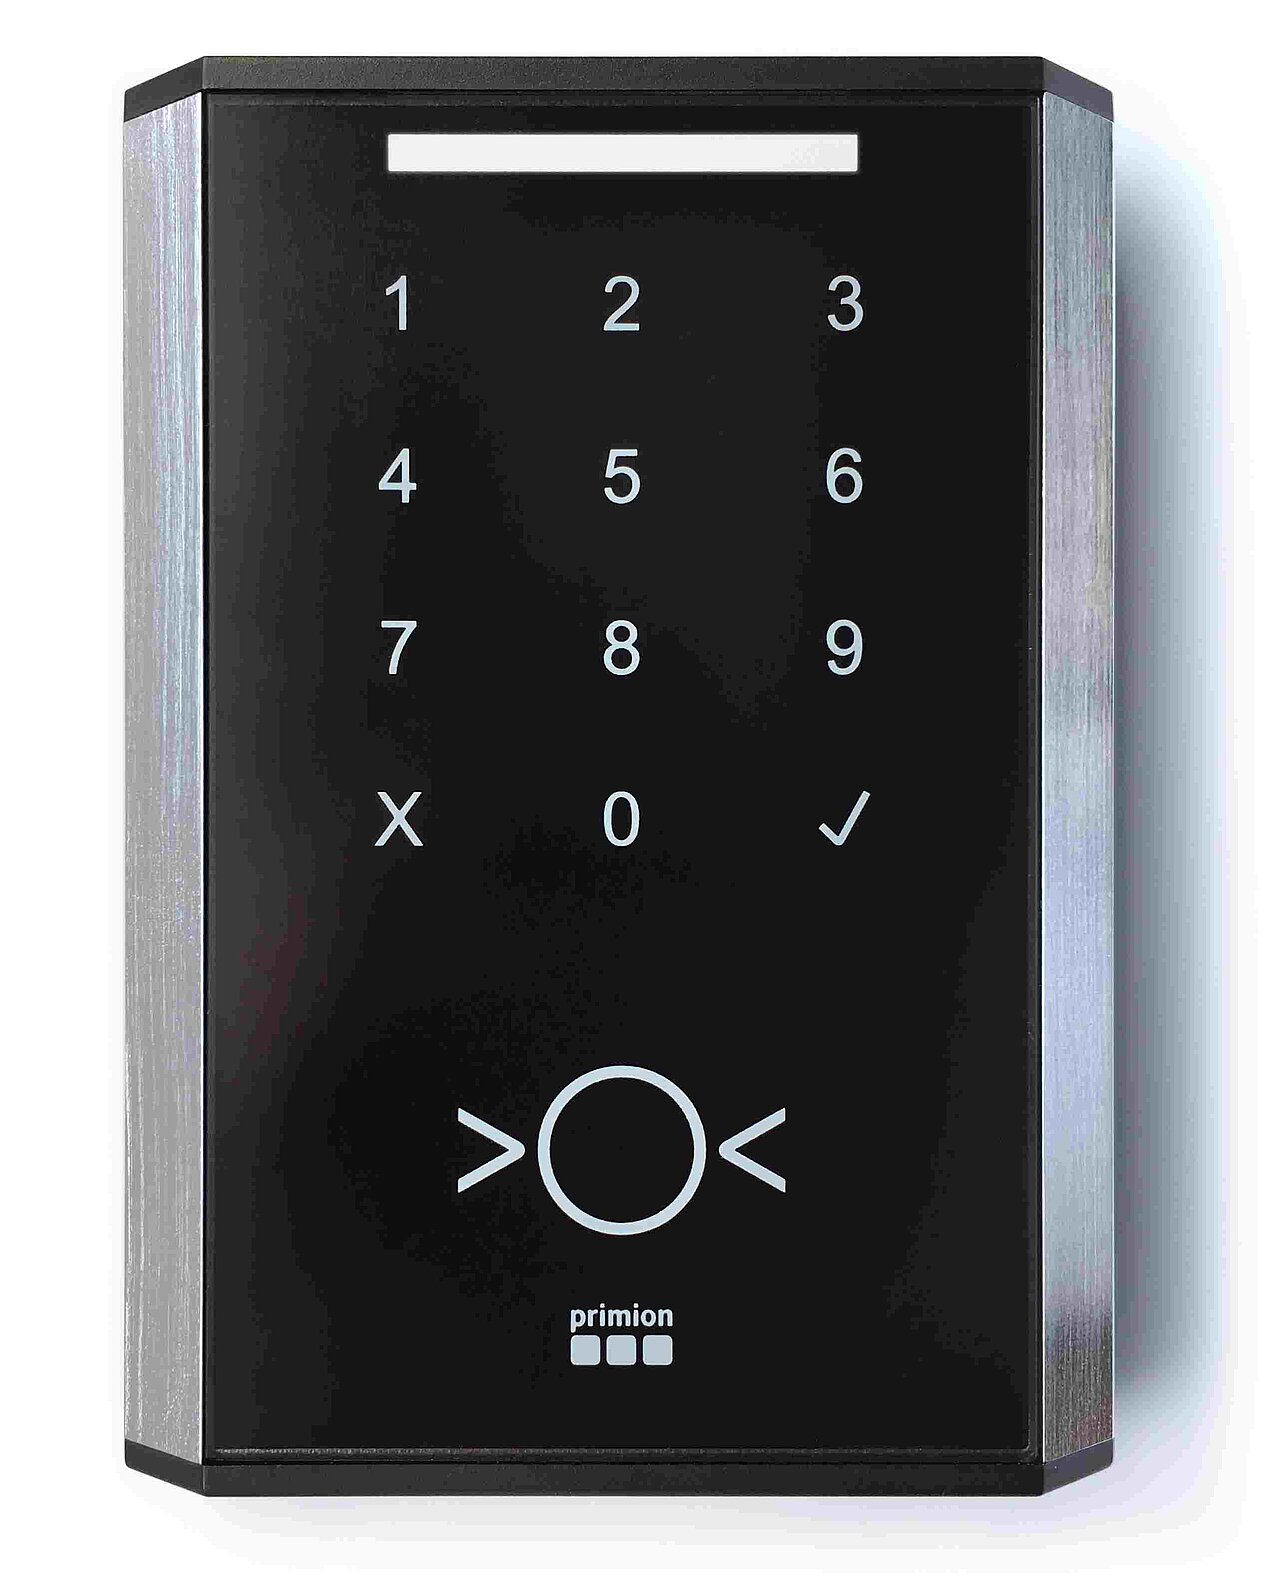 ADR Outdoor with keypad for access control